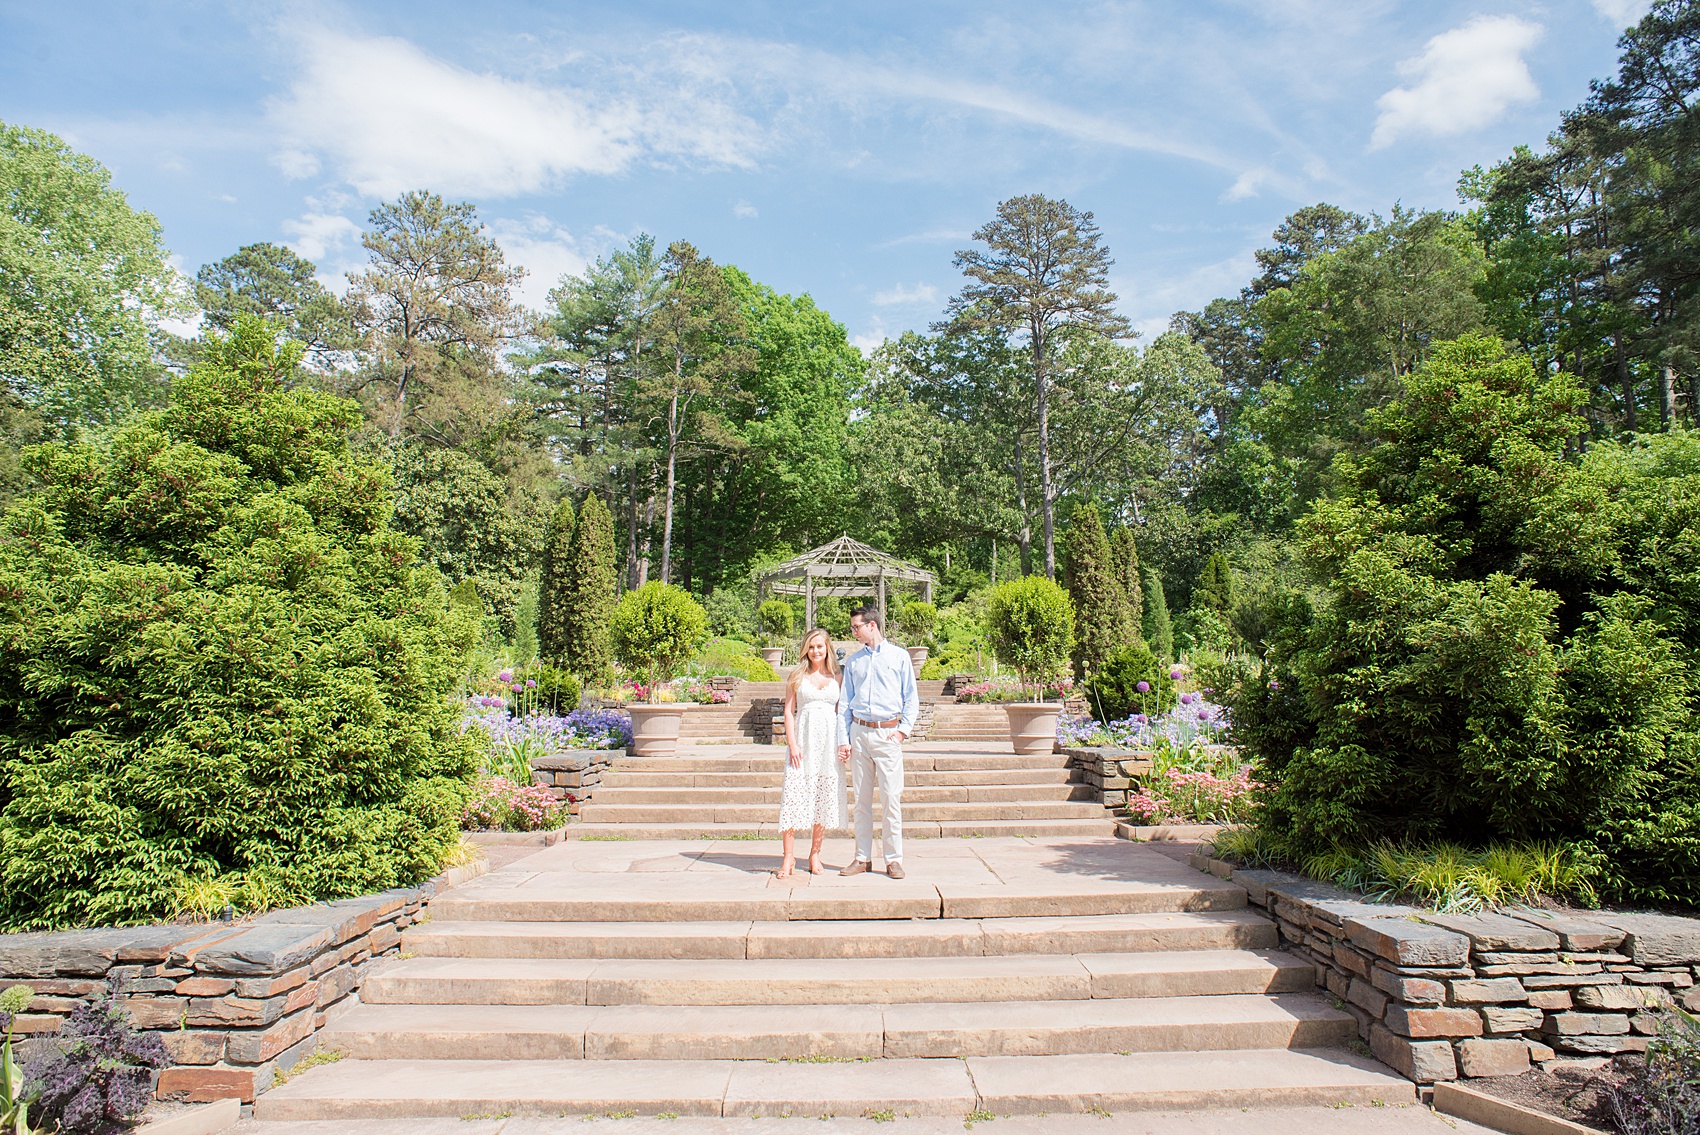 Duke Gardens engagement photos in Durham, North Carolina, by Mikkel Paige Photography. Trees with leaves in full bloom during spring reveal themselves for a May session. #DurhamPhotographer #DurhamWeddingPhotographer #SarahPDukeGardens #DukeGardens #DurhamEngagementSession